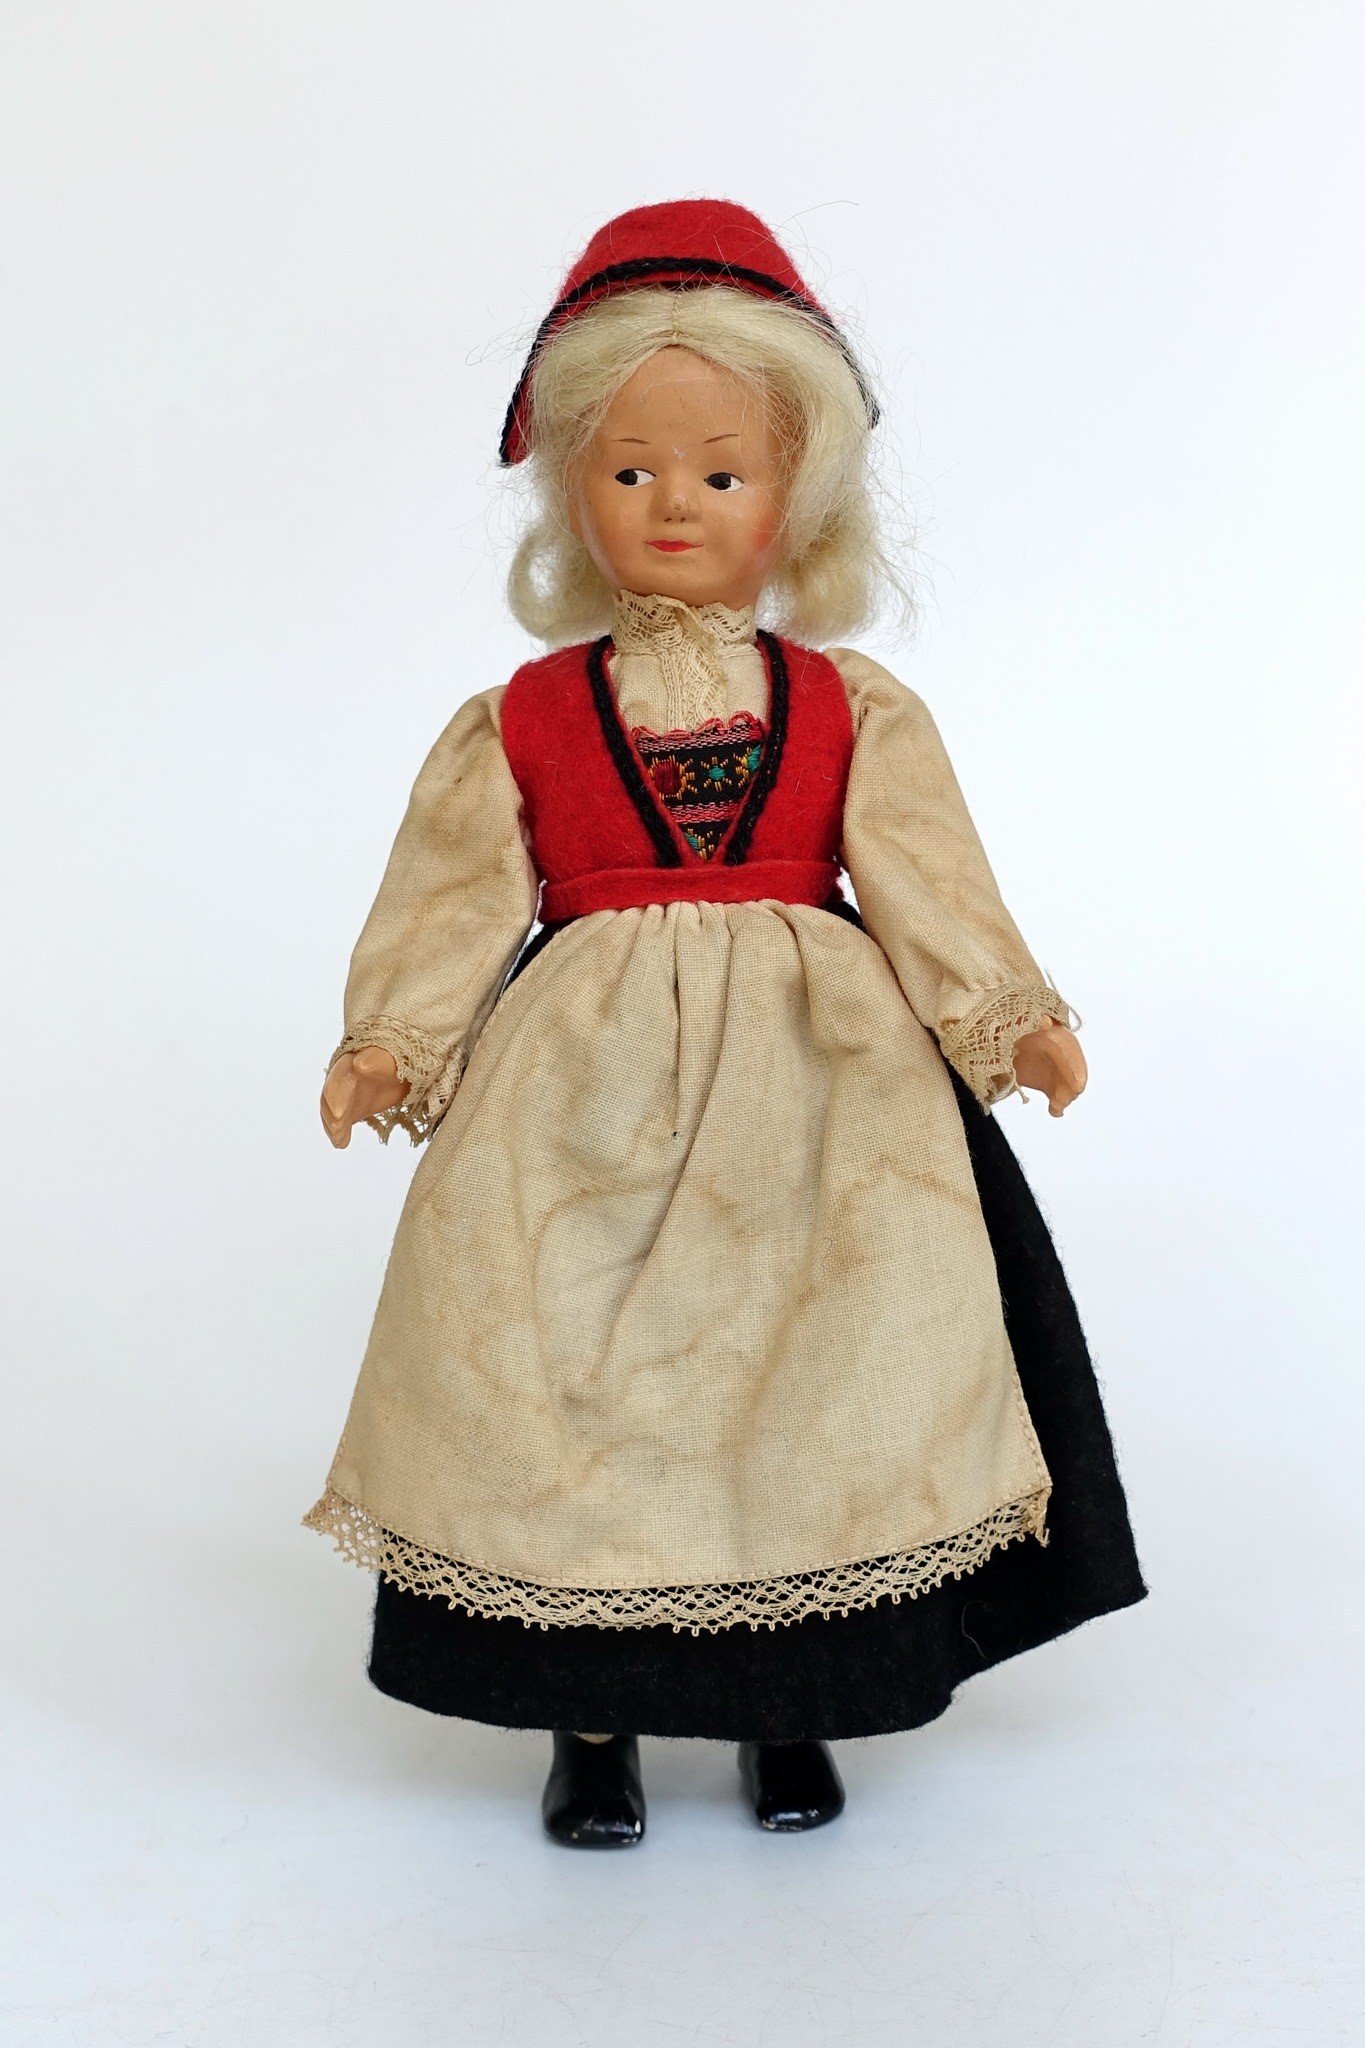 Norway Doll Hardanger | National costume dolls from all over the world